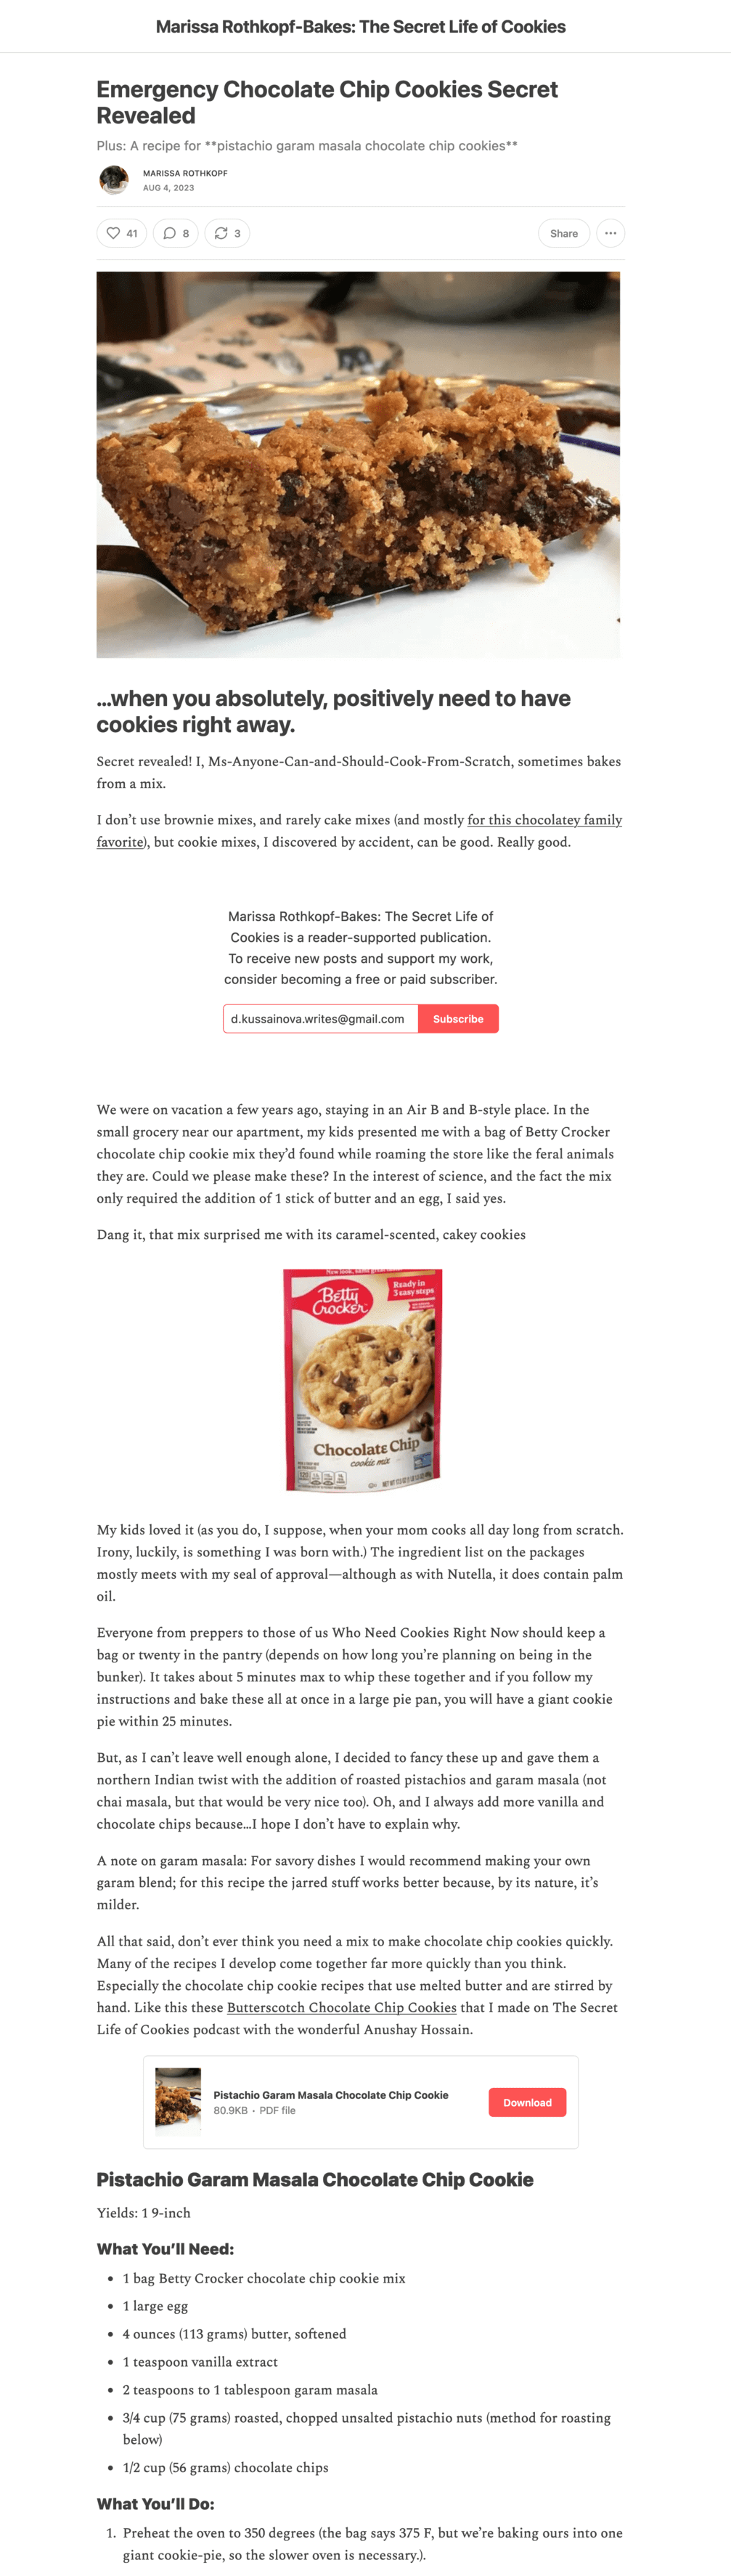 A fragment of one of The Secret Life of Cookies newsletter’s emails